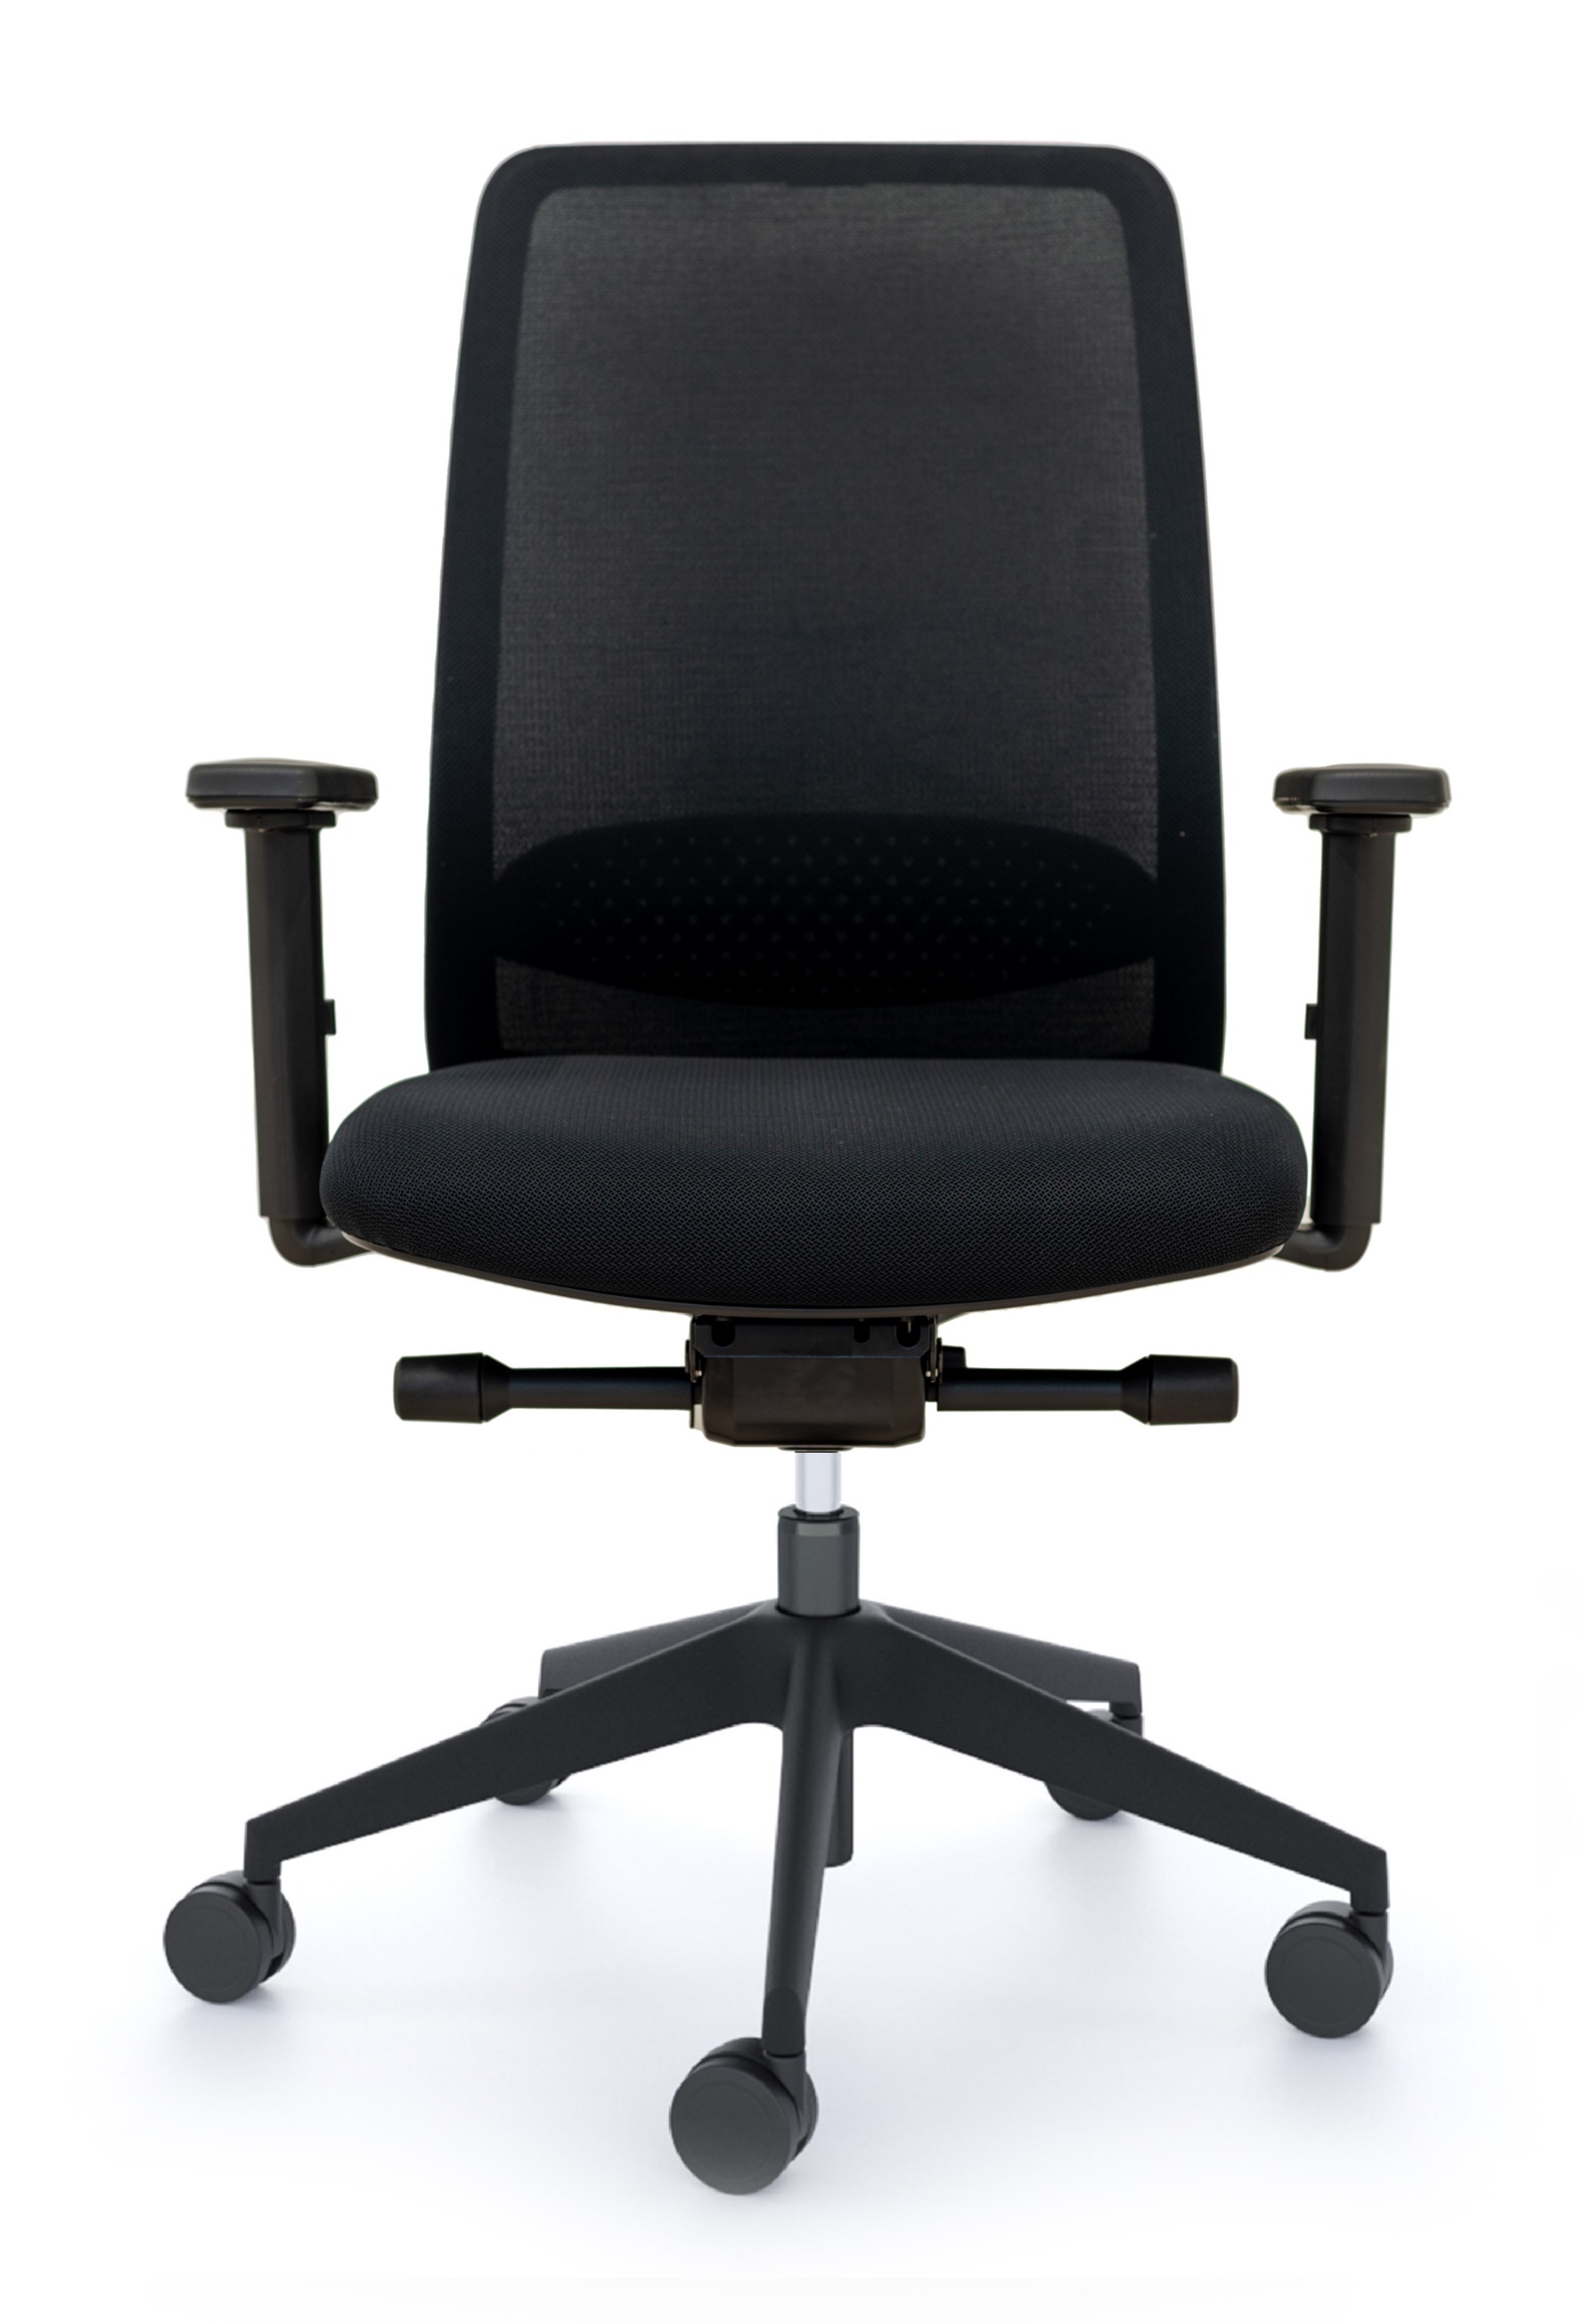 WS - N12 task chair - White&Black (Front)